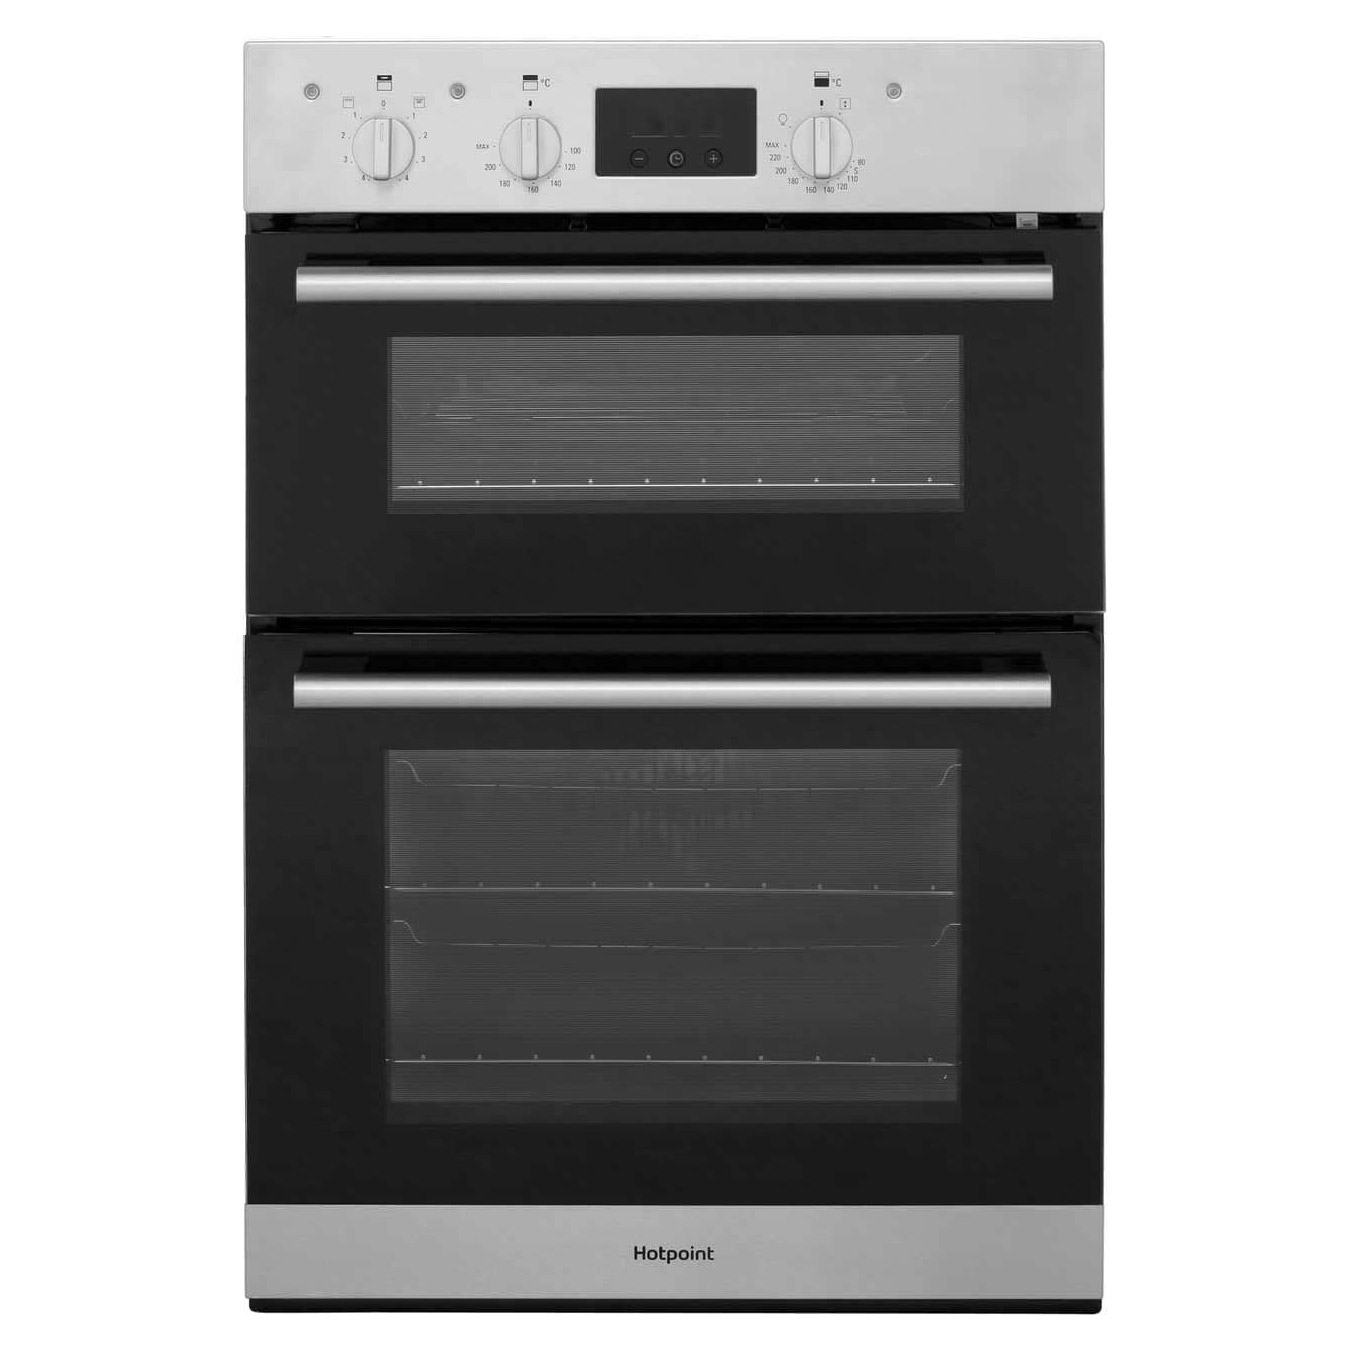 Image of Hotpoint DD2540IX Built In Electric Double Oven in Stainless Steel